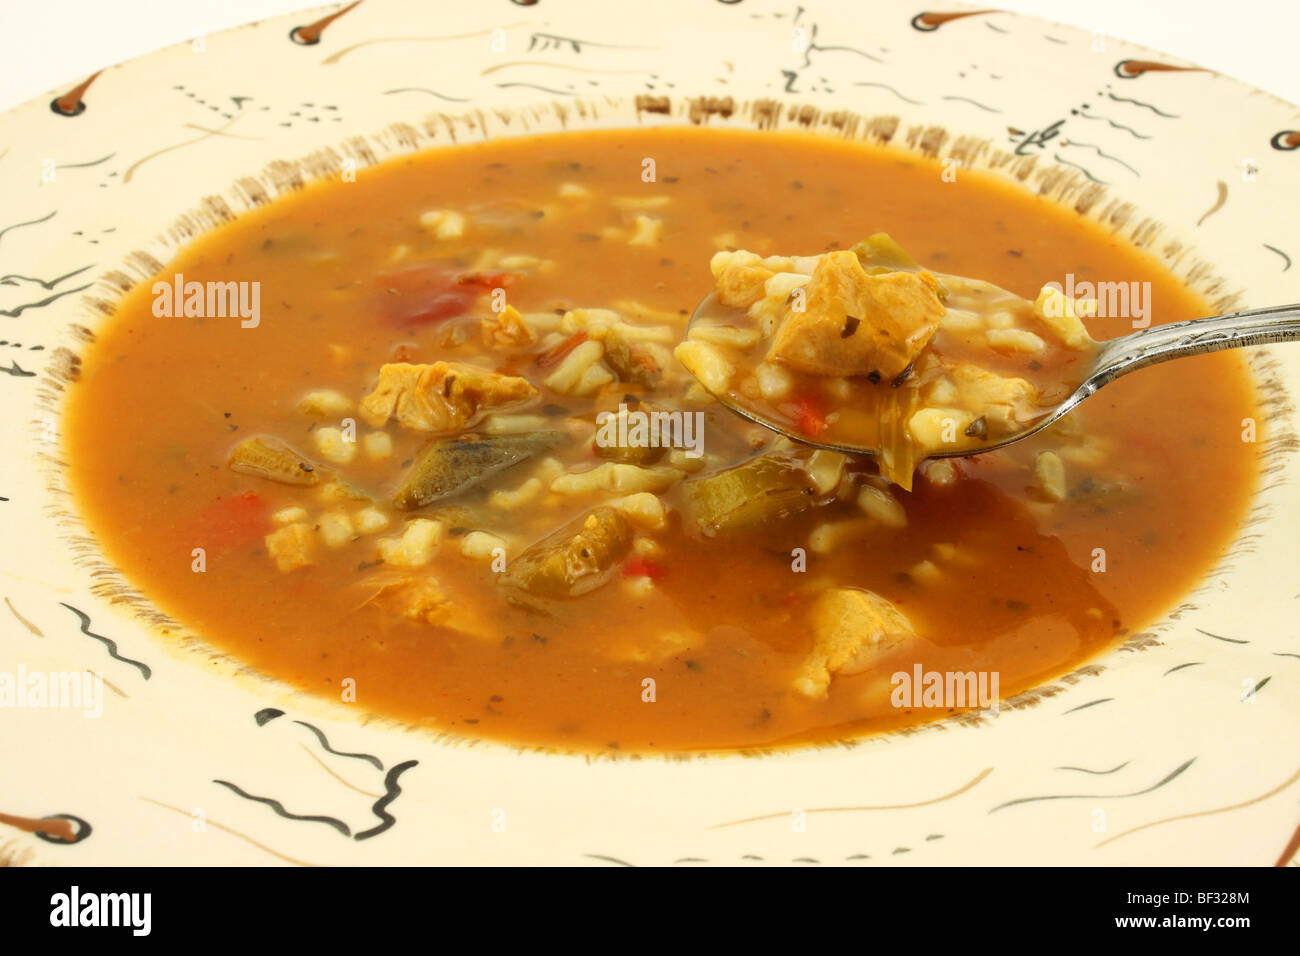 Close view of spicy chicken soup Stock Photo